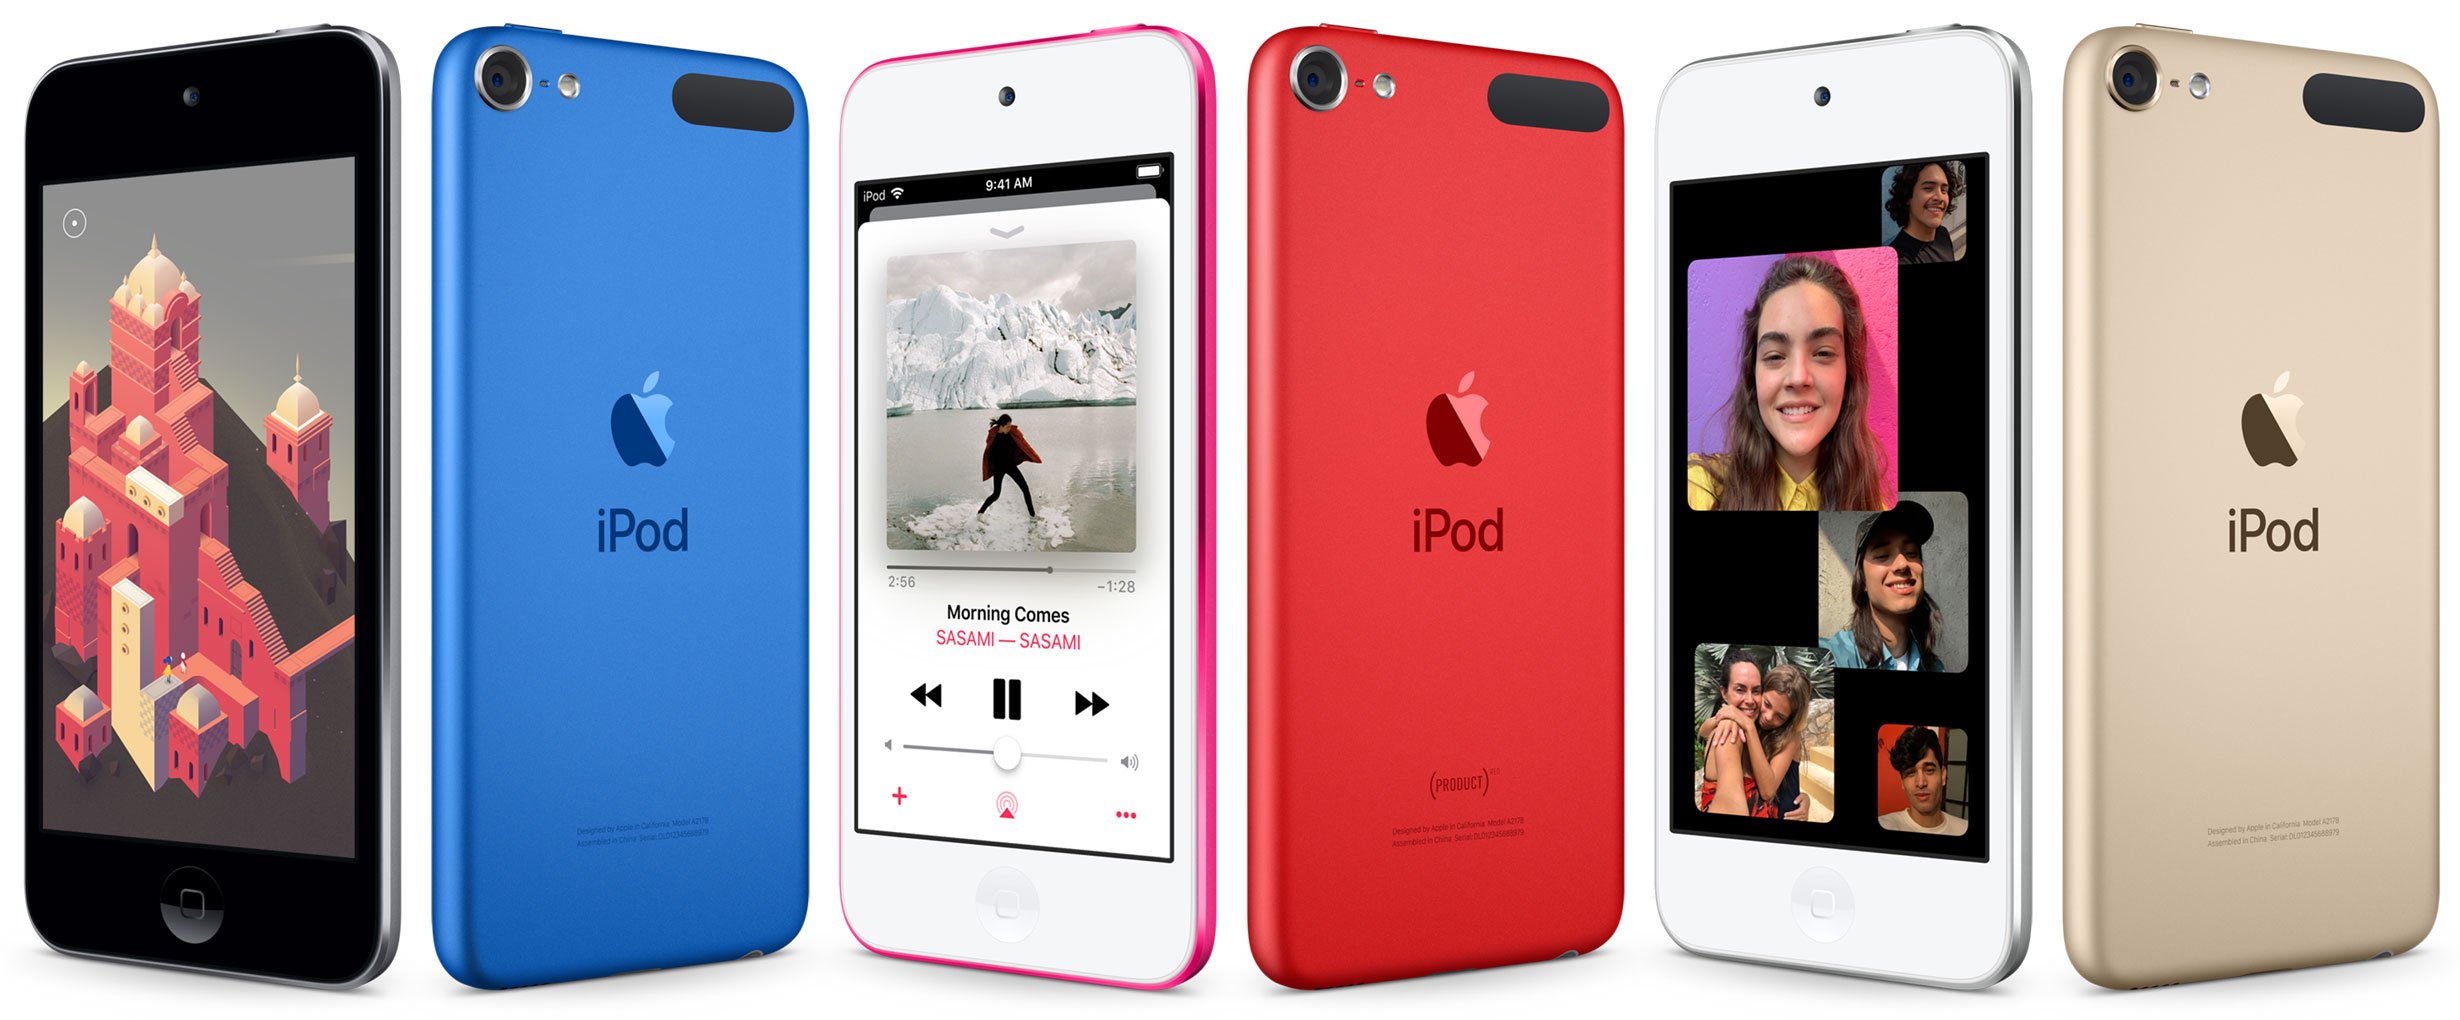 How to put games to iPod touch, iPod classic